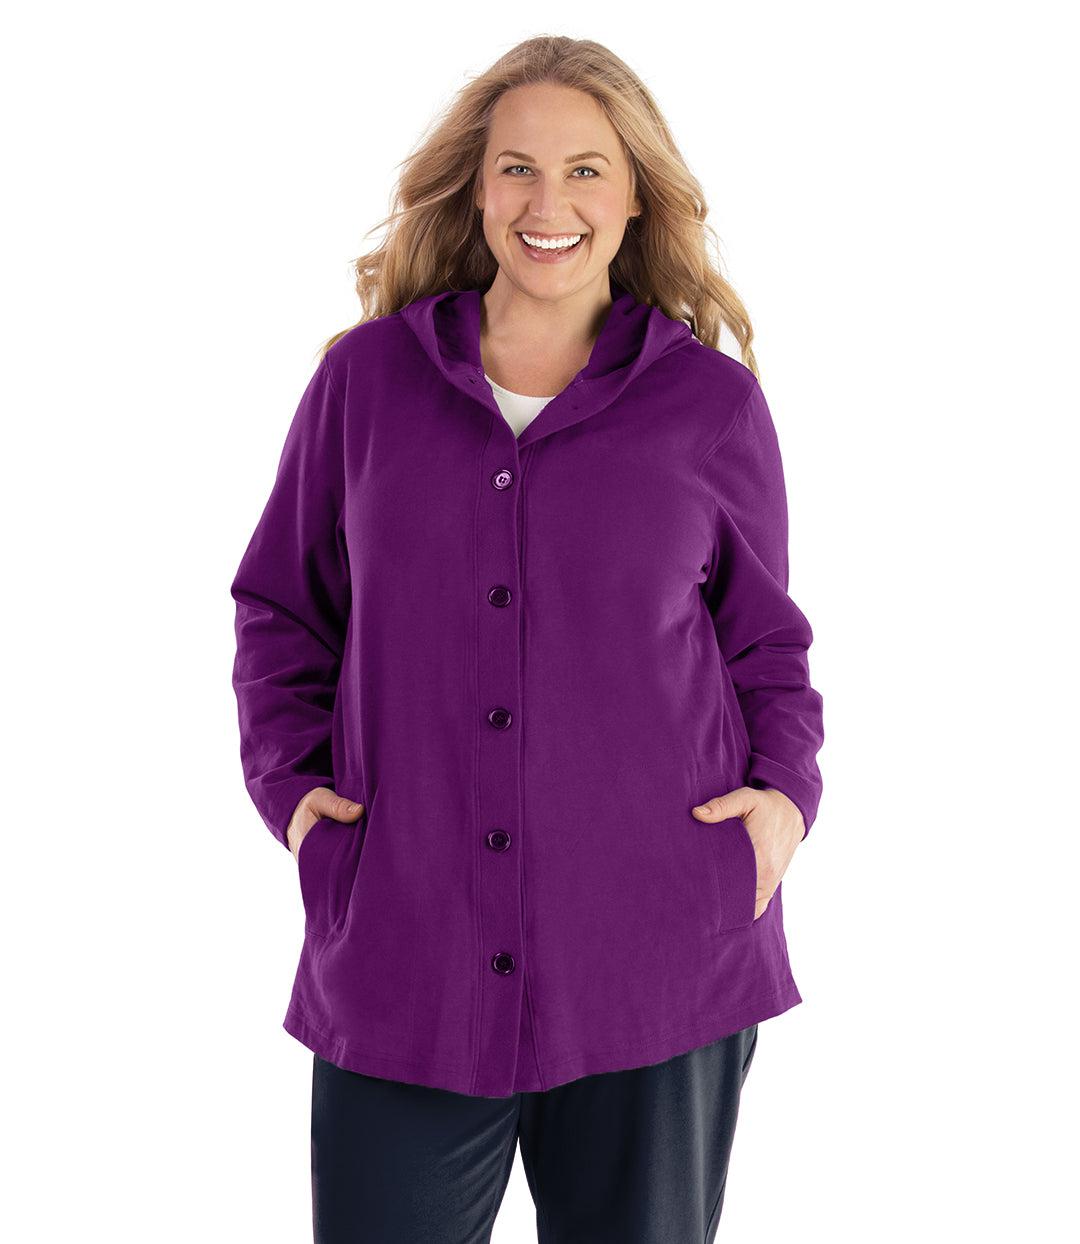 Plus size woman, facing front, wearing JunoActive plus size Legacy Cotton Casual Button Up Hoodie in the color Heliotrope Purple. She is wearing JunoActive Plus Size Leggings in the color Black.